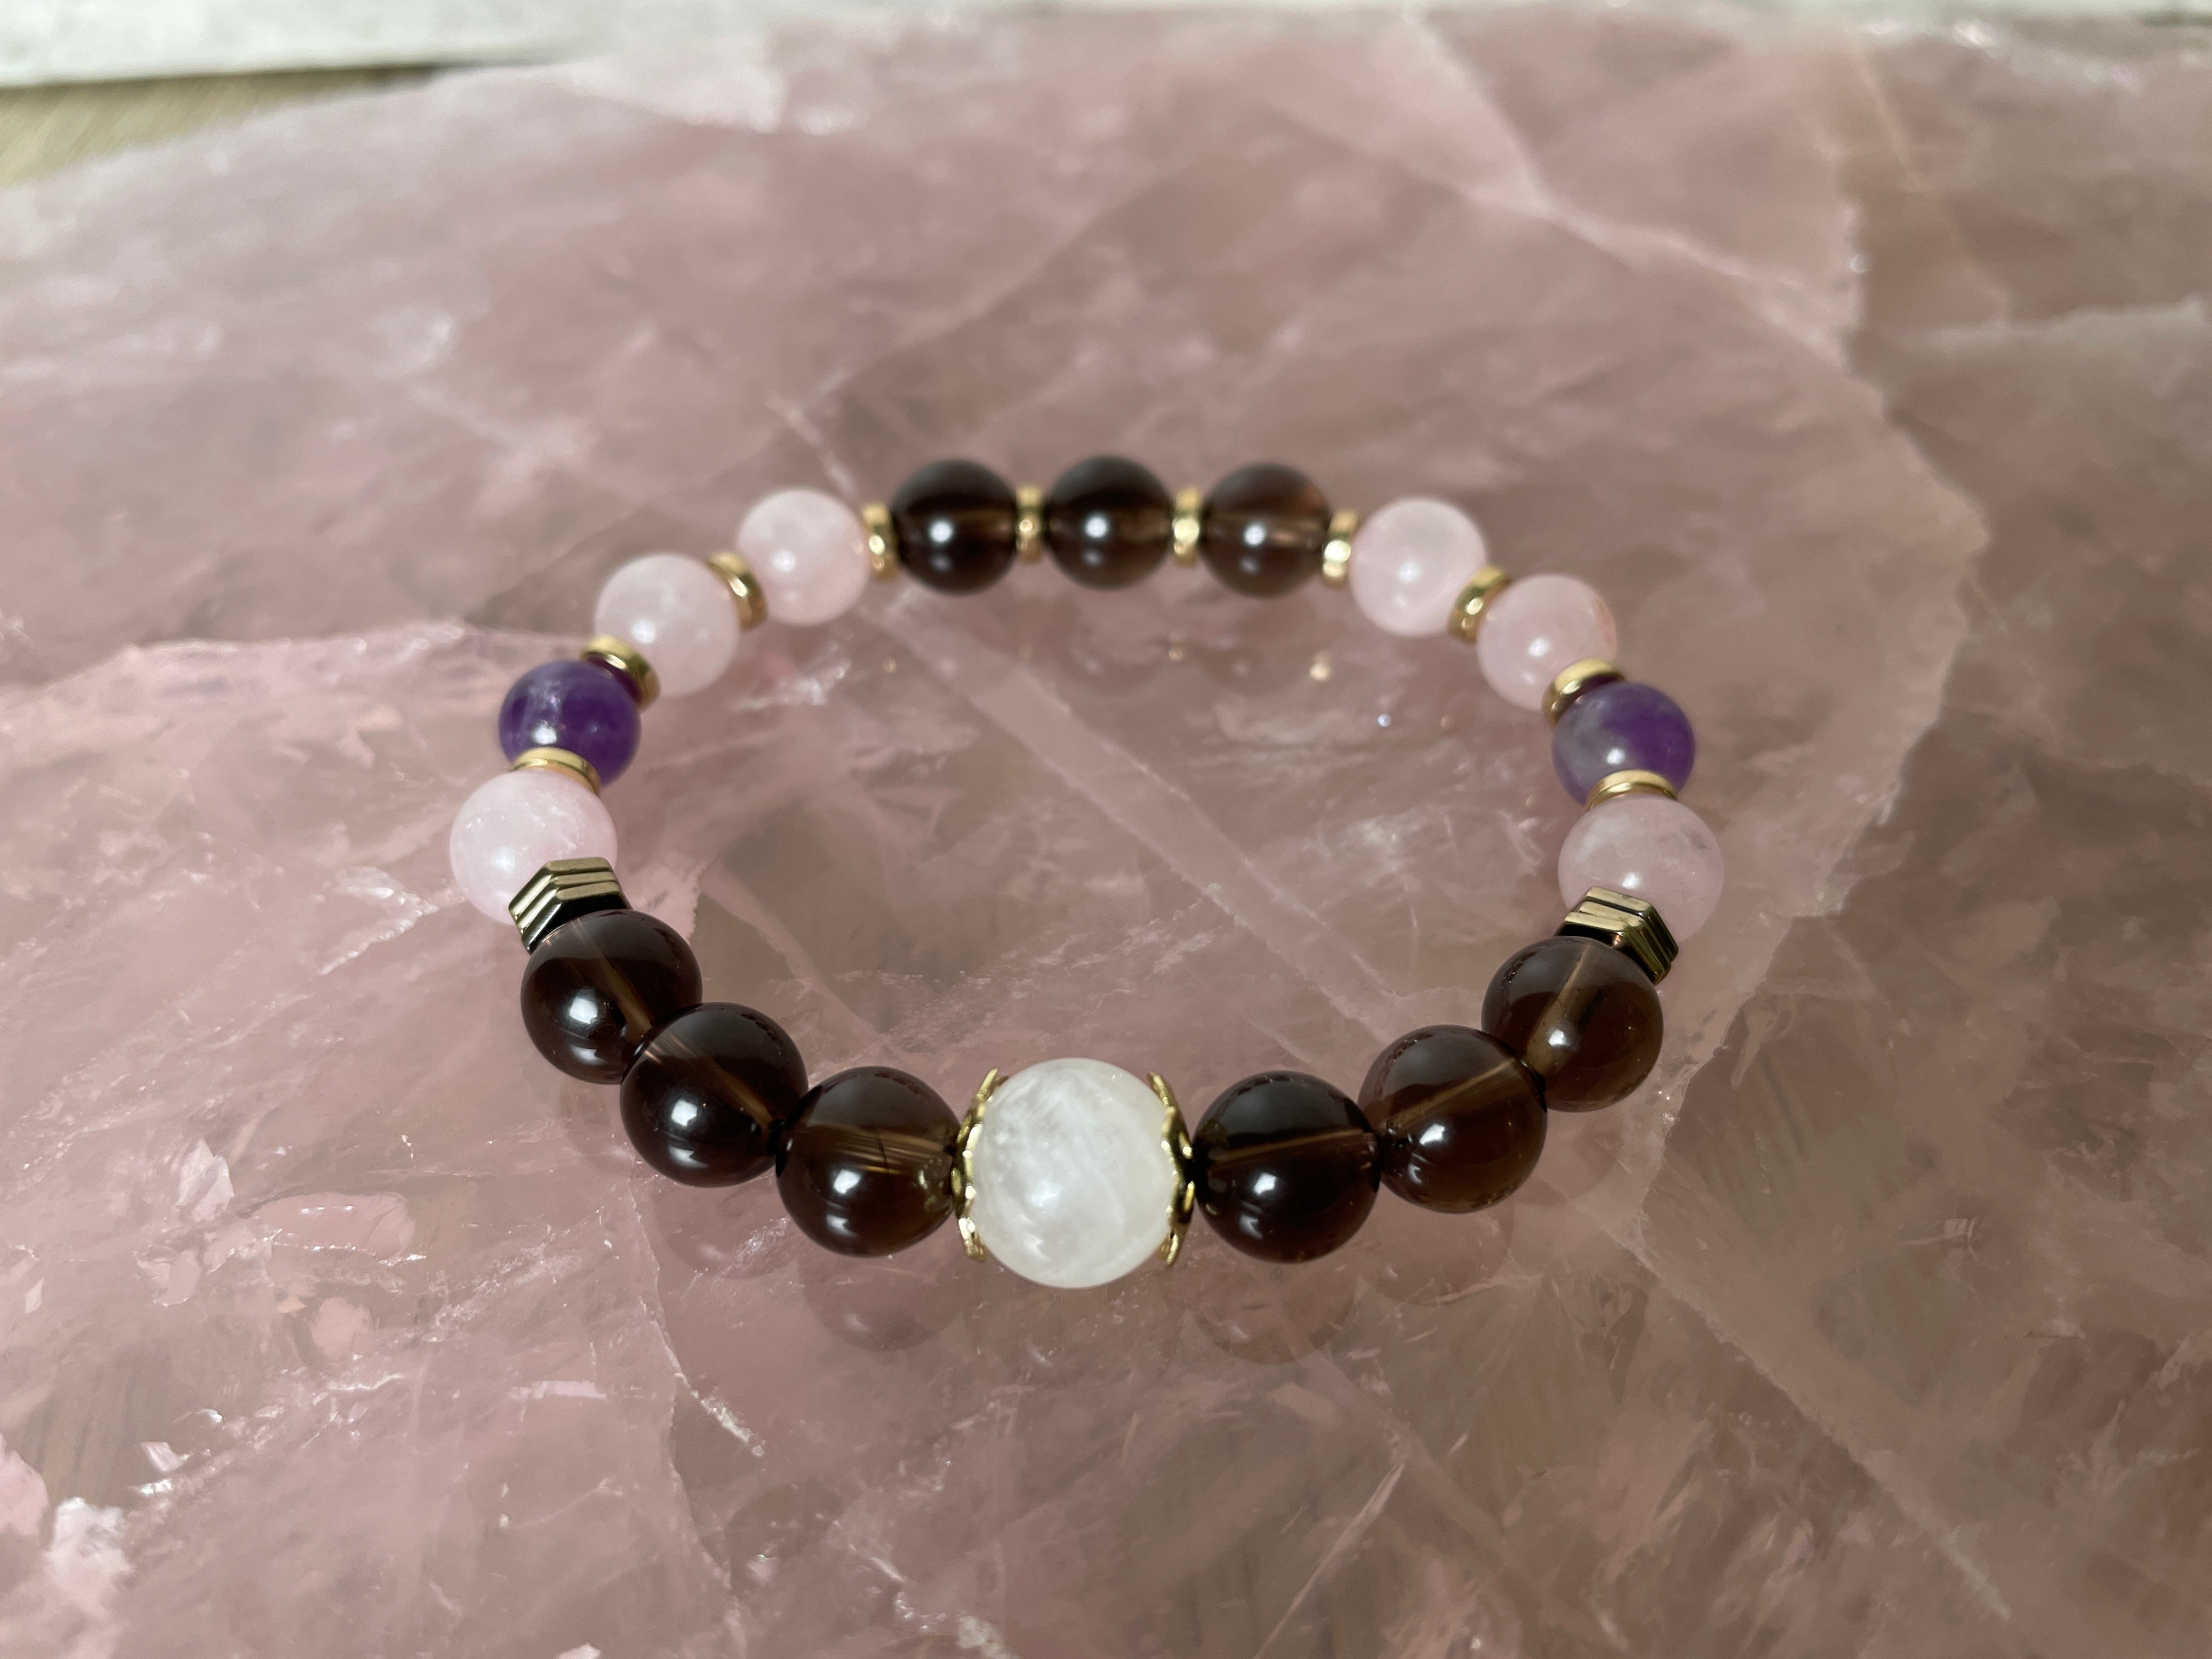 Buy Online Latest and Unique Grief & Loss Crystal Bracelet | Shop Best Spiritual Items - The Mystical Ritual